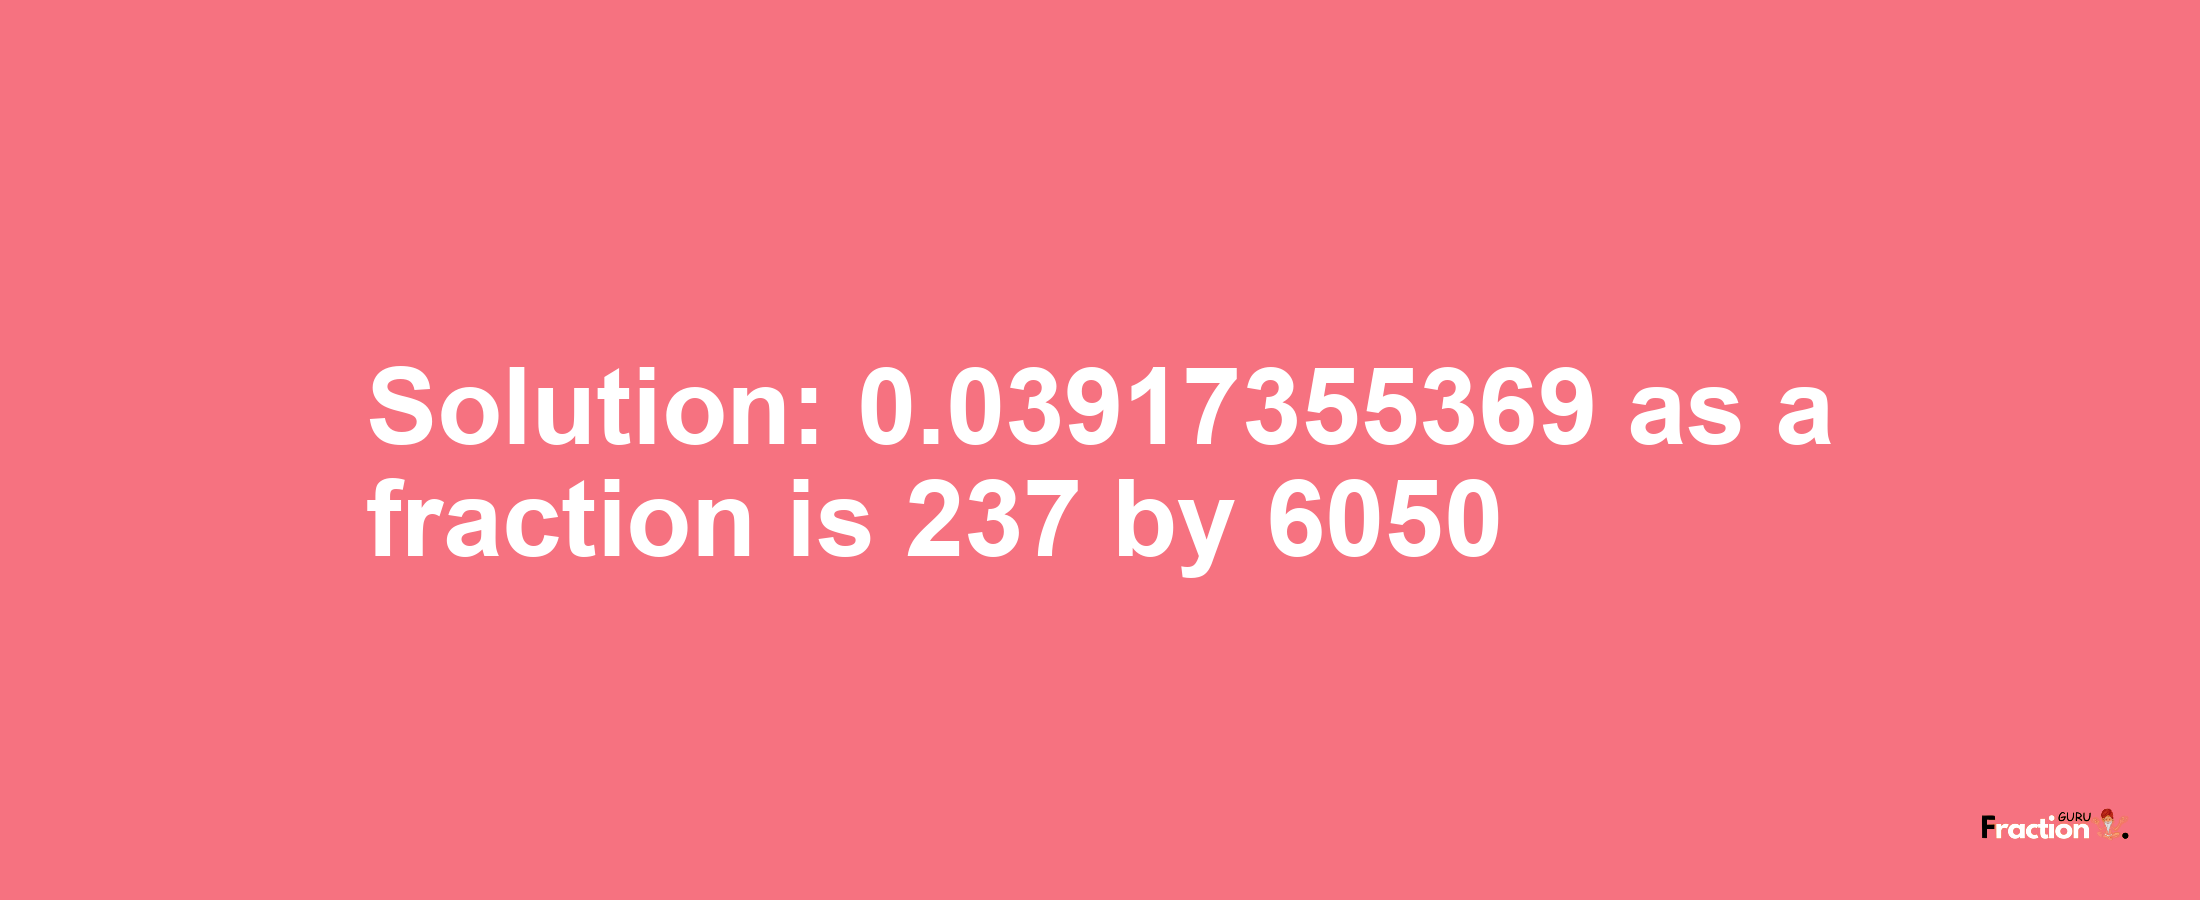 Solution:0.03917355369 as a fraction is 237/6050